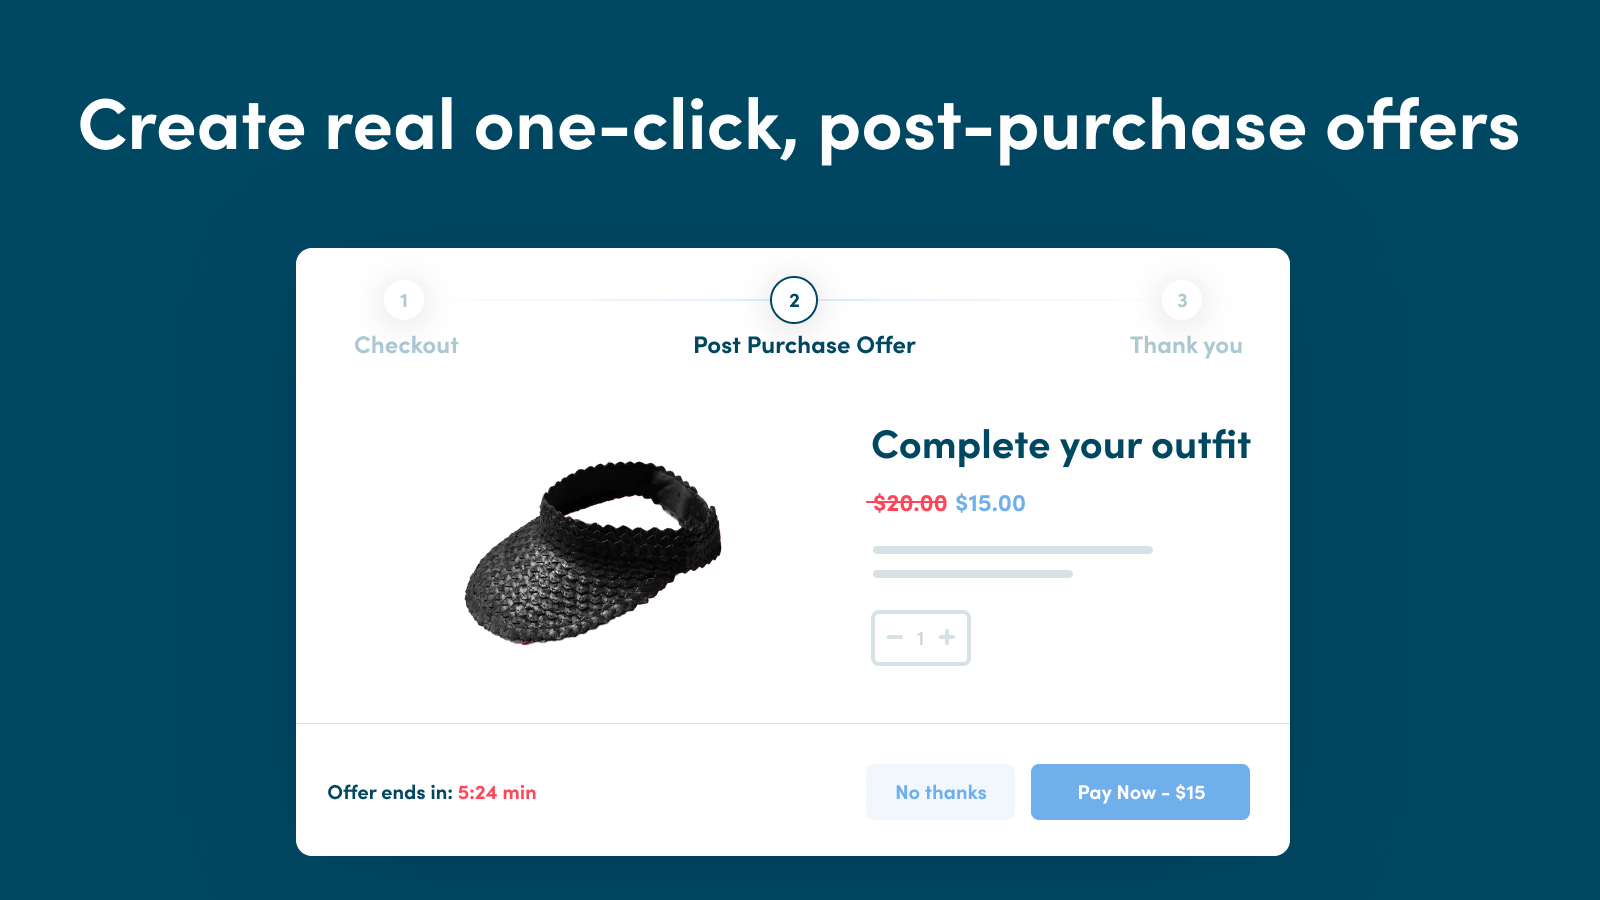 Real one-click post-purchase offers